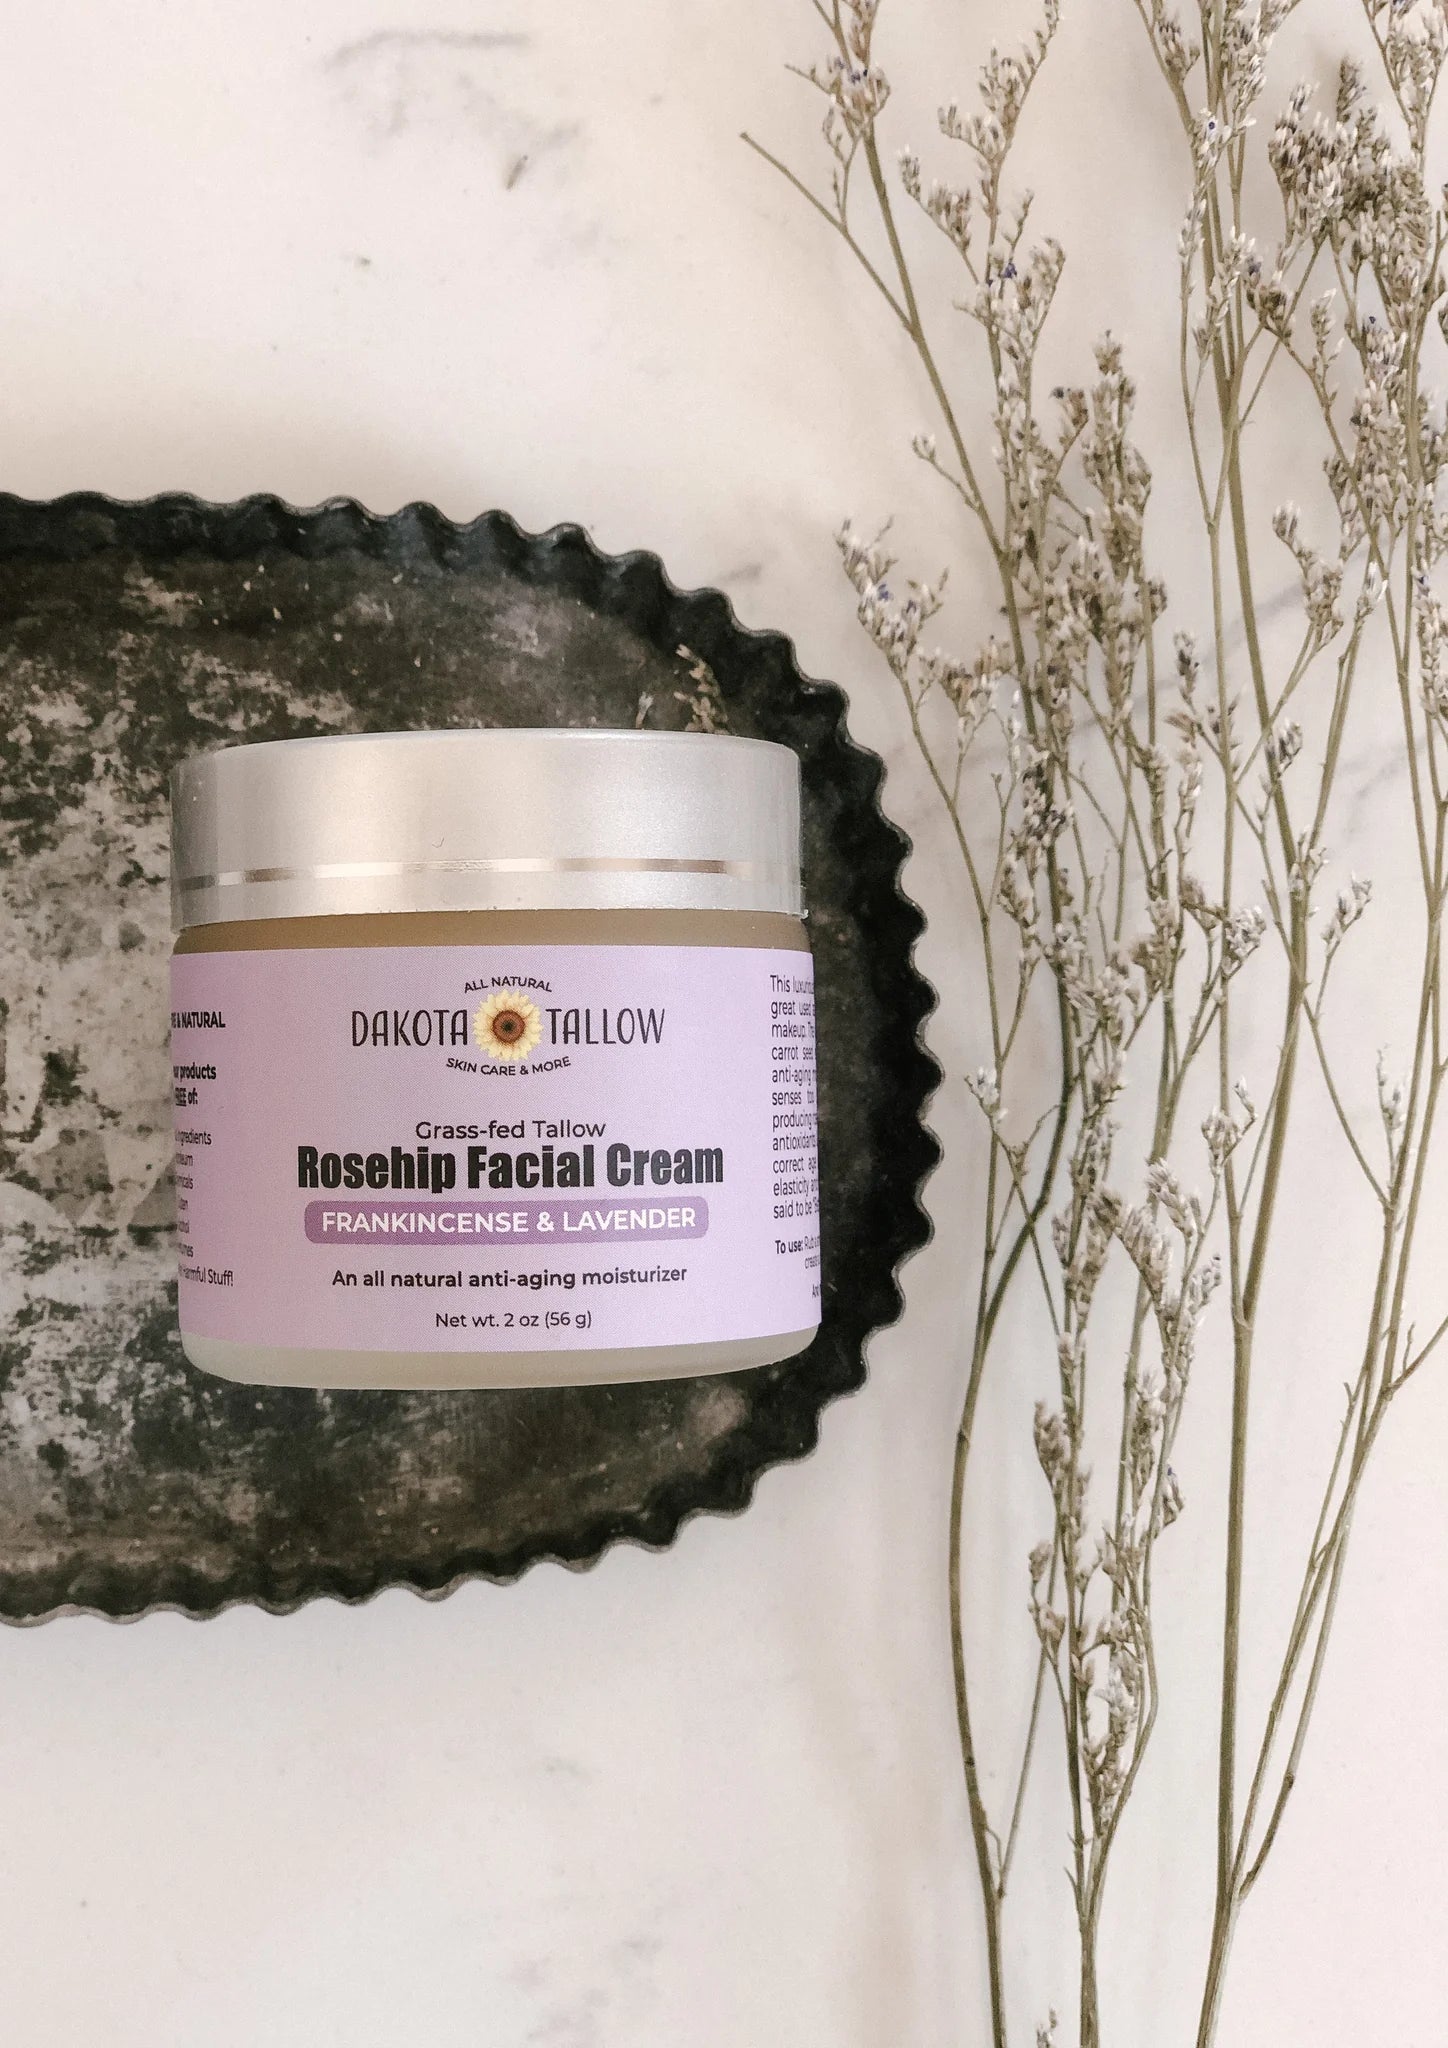 Grass-fed Tallow Rosehip Facial Cream blended with organic frankincense and lavender essential oils